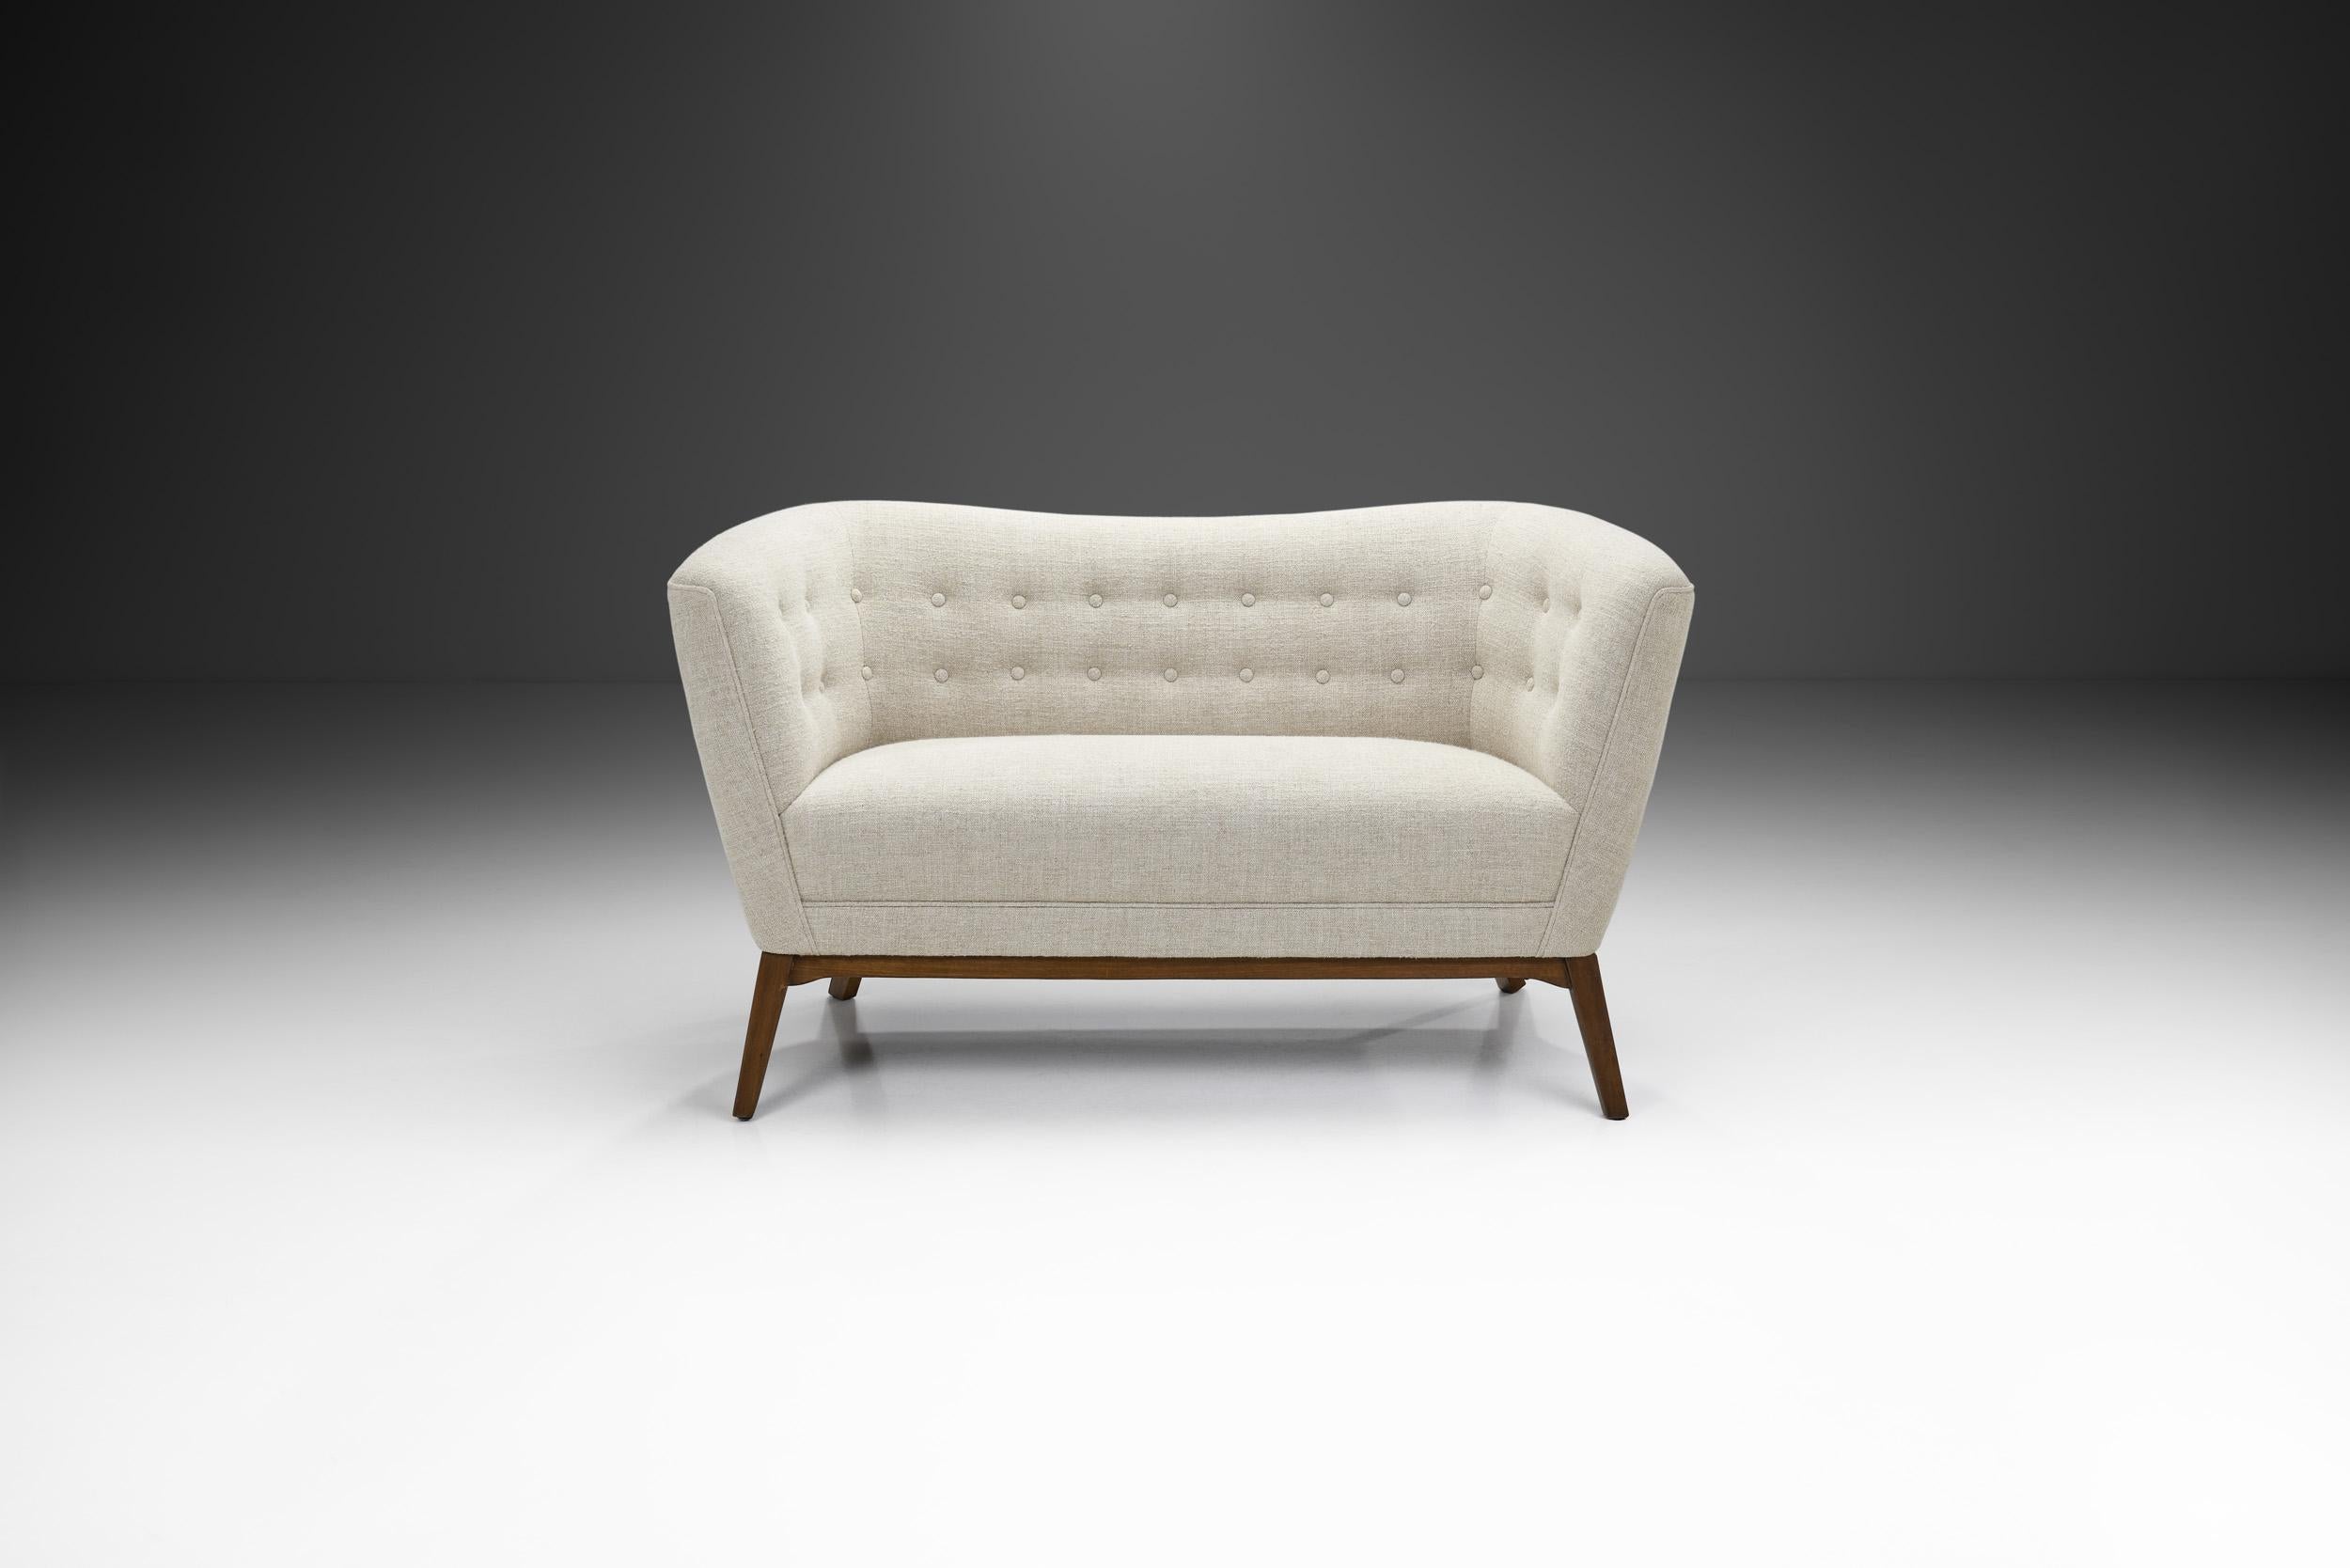 This Danish-made freestanding sofa is characterized by the best qualities of Danish mid-century design; from the restrained aesthetic to the elegant pairing of materials, this two-seater is the perfect example of how pairing Danish design, the work